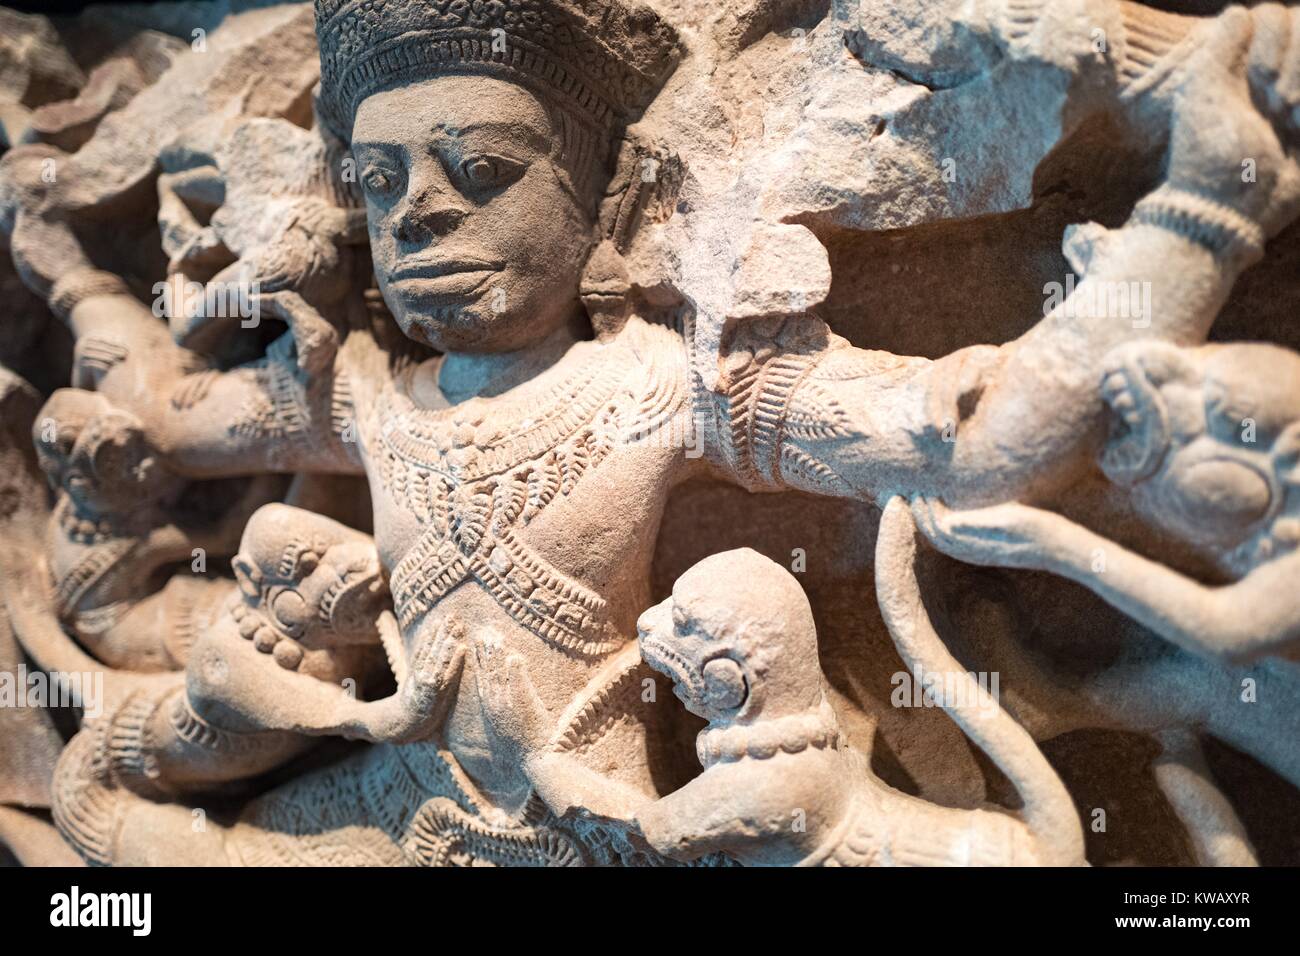 Detail view from the Indian carved stone work Kumbhakarna Battles the Monkeys, showing a scene from the epic Ramayana in which Kumbhakarna defeats an army of monkeys, October 2, 2016. Stock Photo